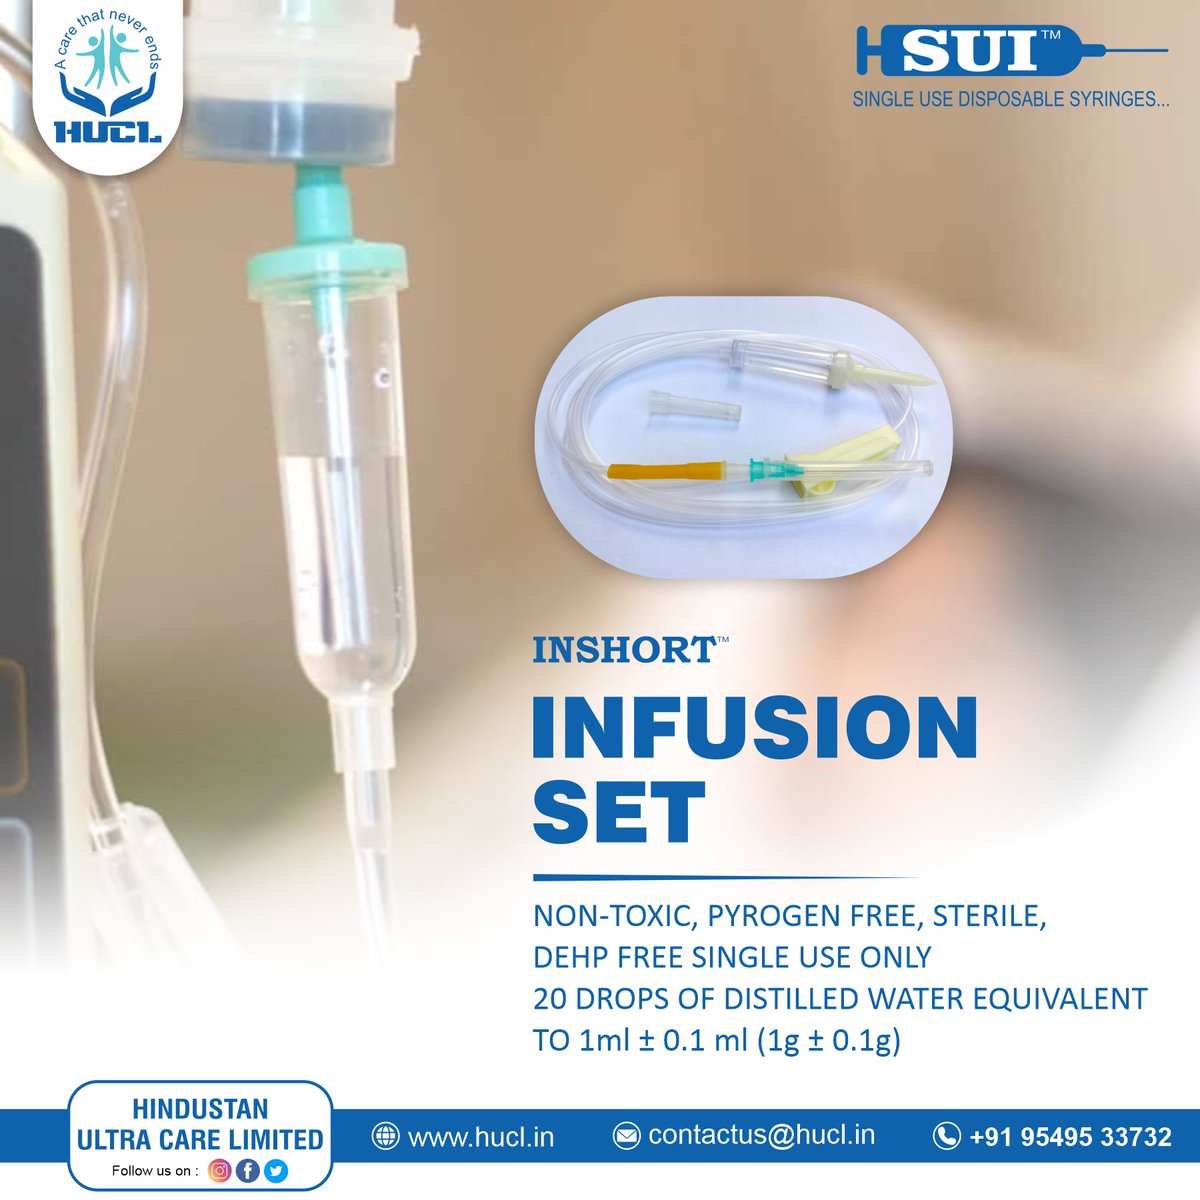 HIGH-QUALITY INFUSION SET
Available at all the leading chemists

#MedicalDevices #MedicalEquipment #infusion
#HealthcareProfessionals #Healthcare #medical #needle #syringes
#MedicalDevices #syringeadvertisement
#MedicalSafety #NewProductRelease